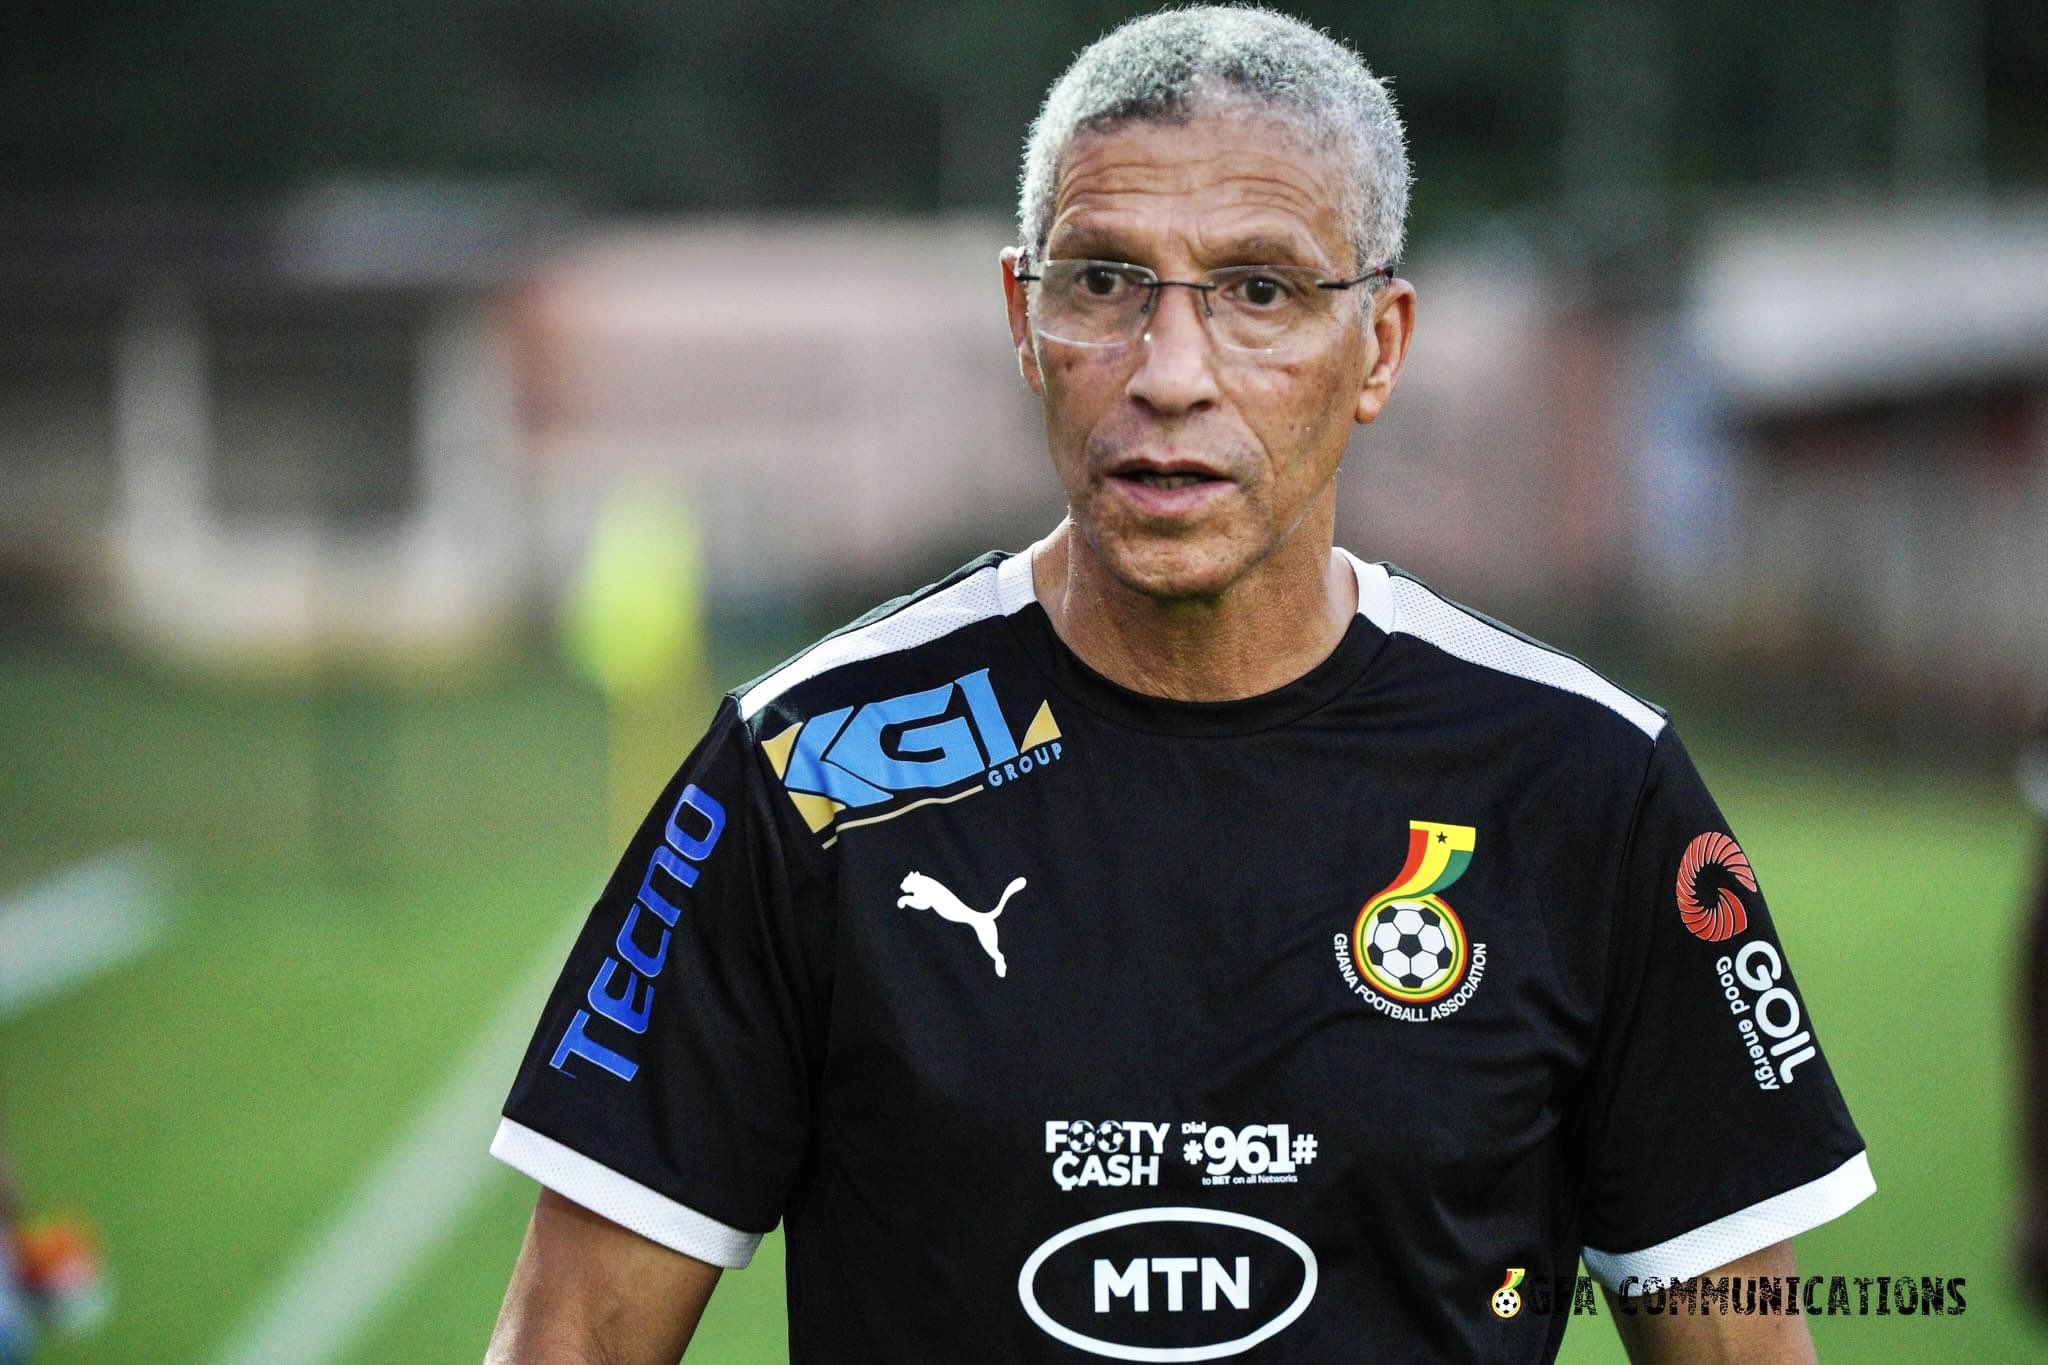 Chris Hughton has been sacked with immediate effect by the GFA following the team’s disappointing performance in the 2023 AFCON.